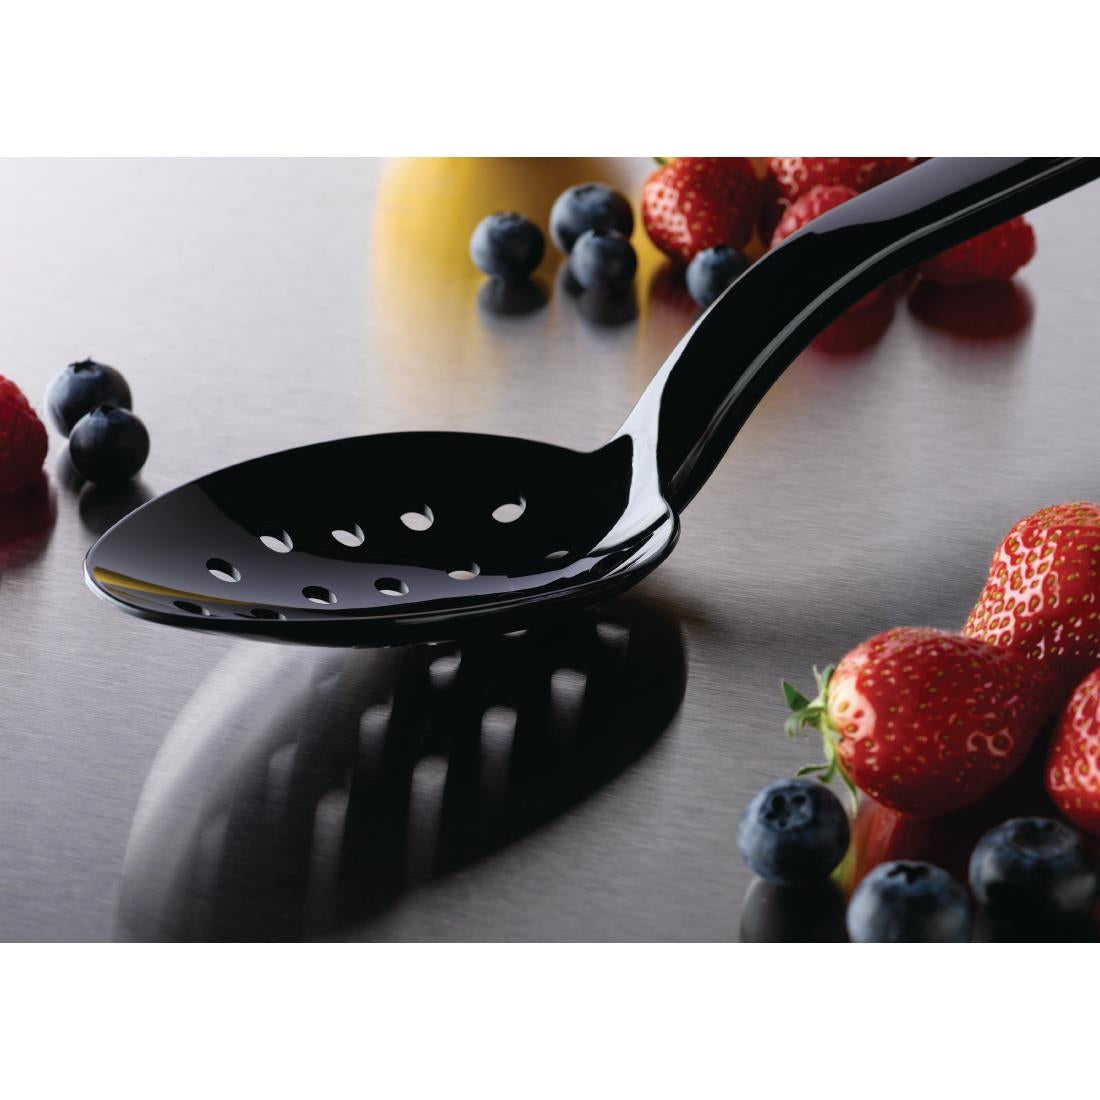 Matfer Exoglass Perforated Serving Spoon 9"